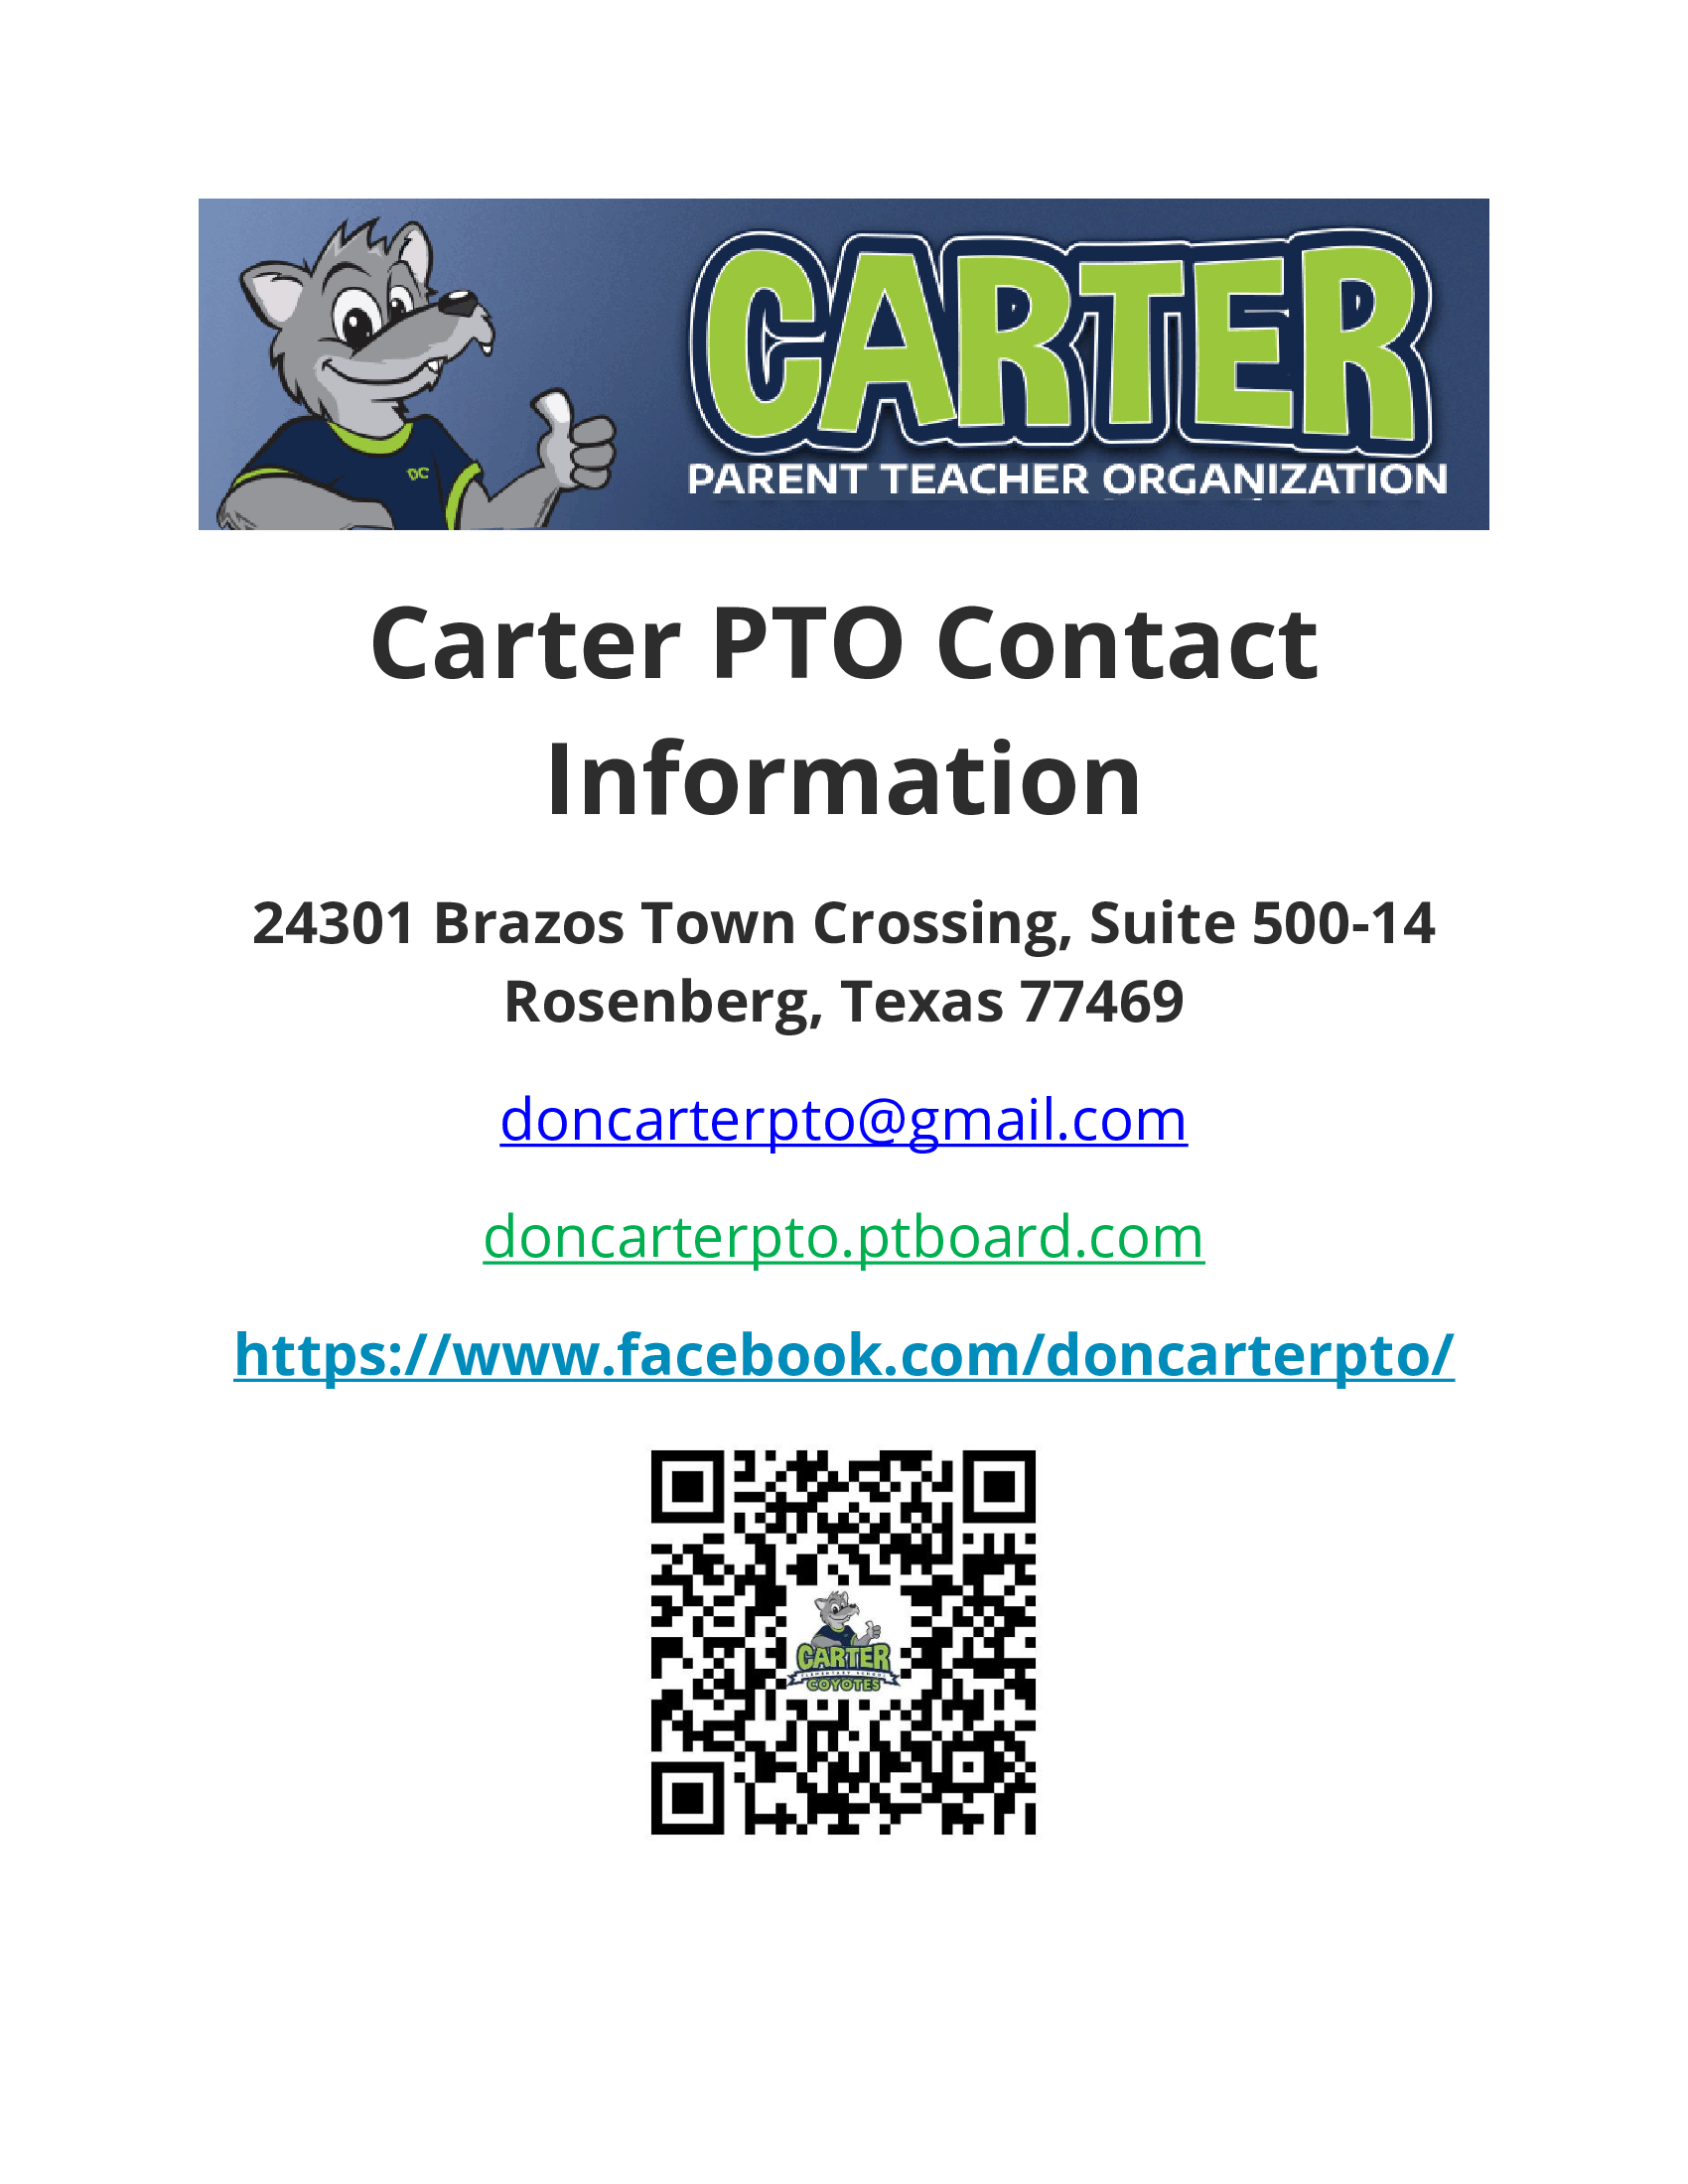 Carter PTO Contact Information 1 of 1